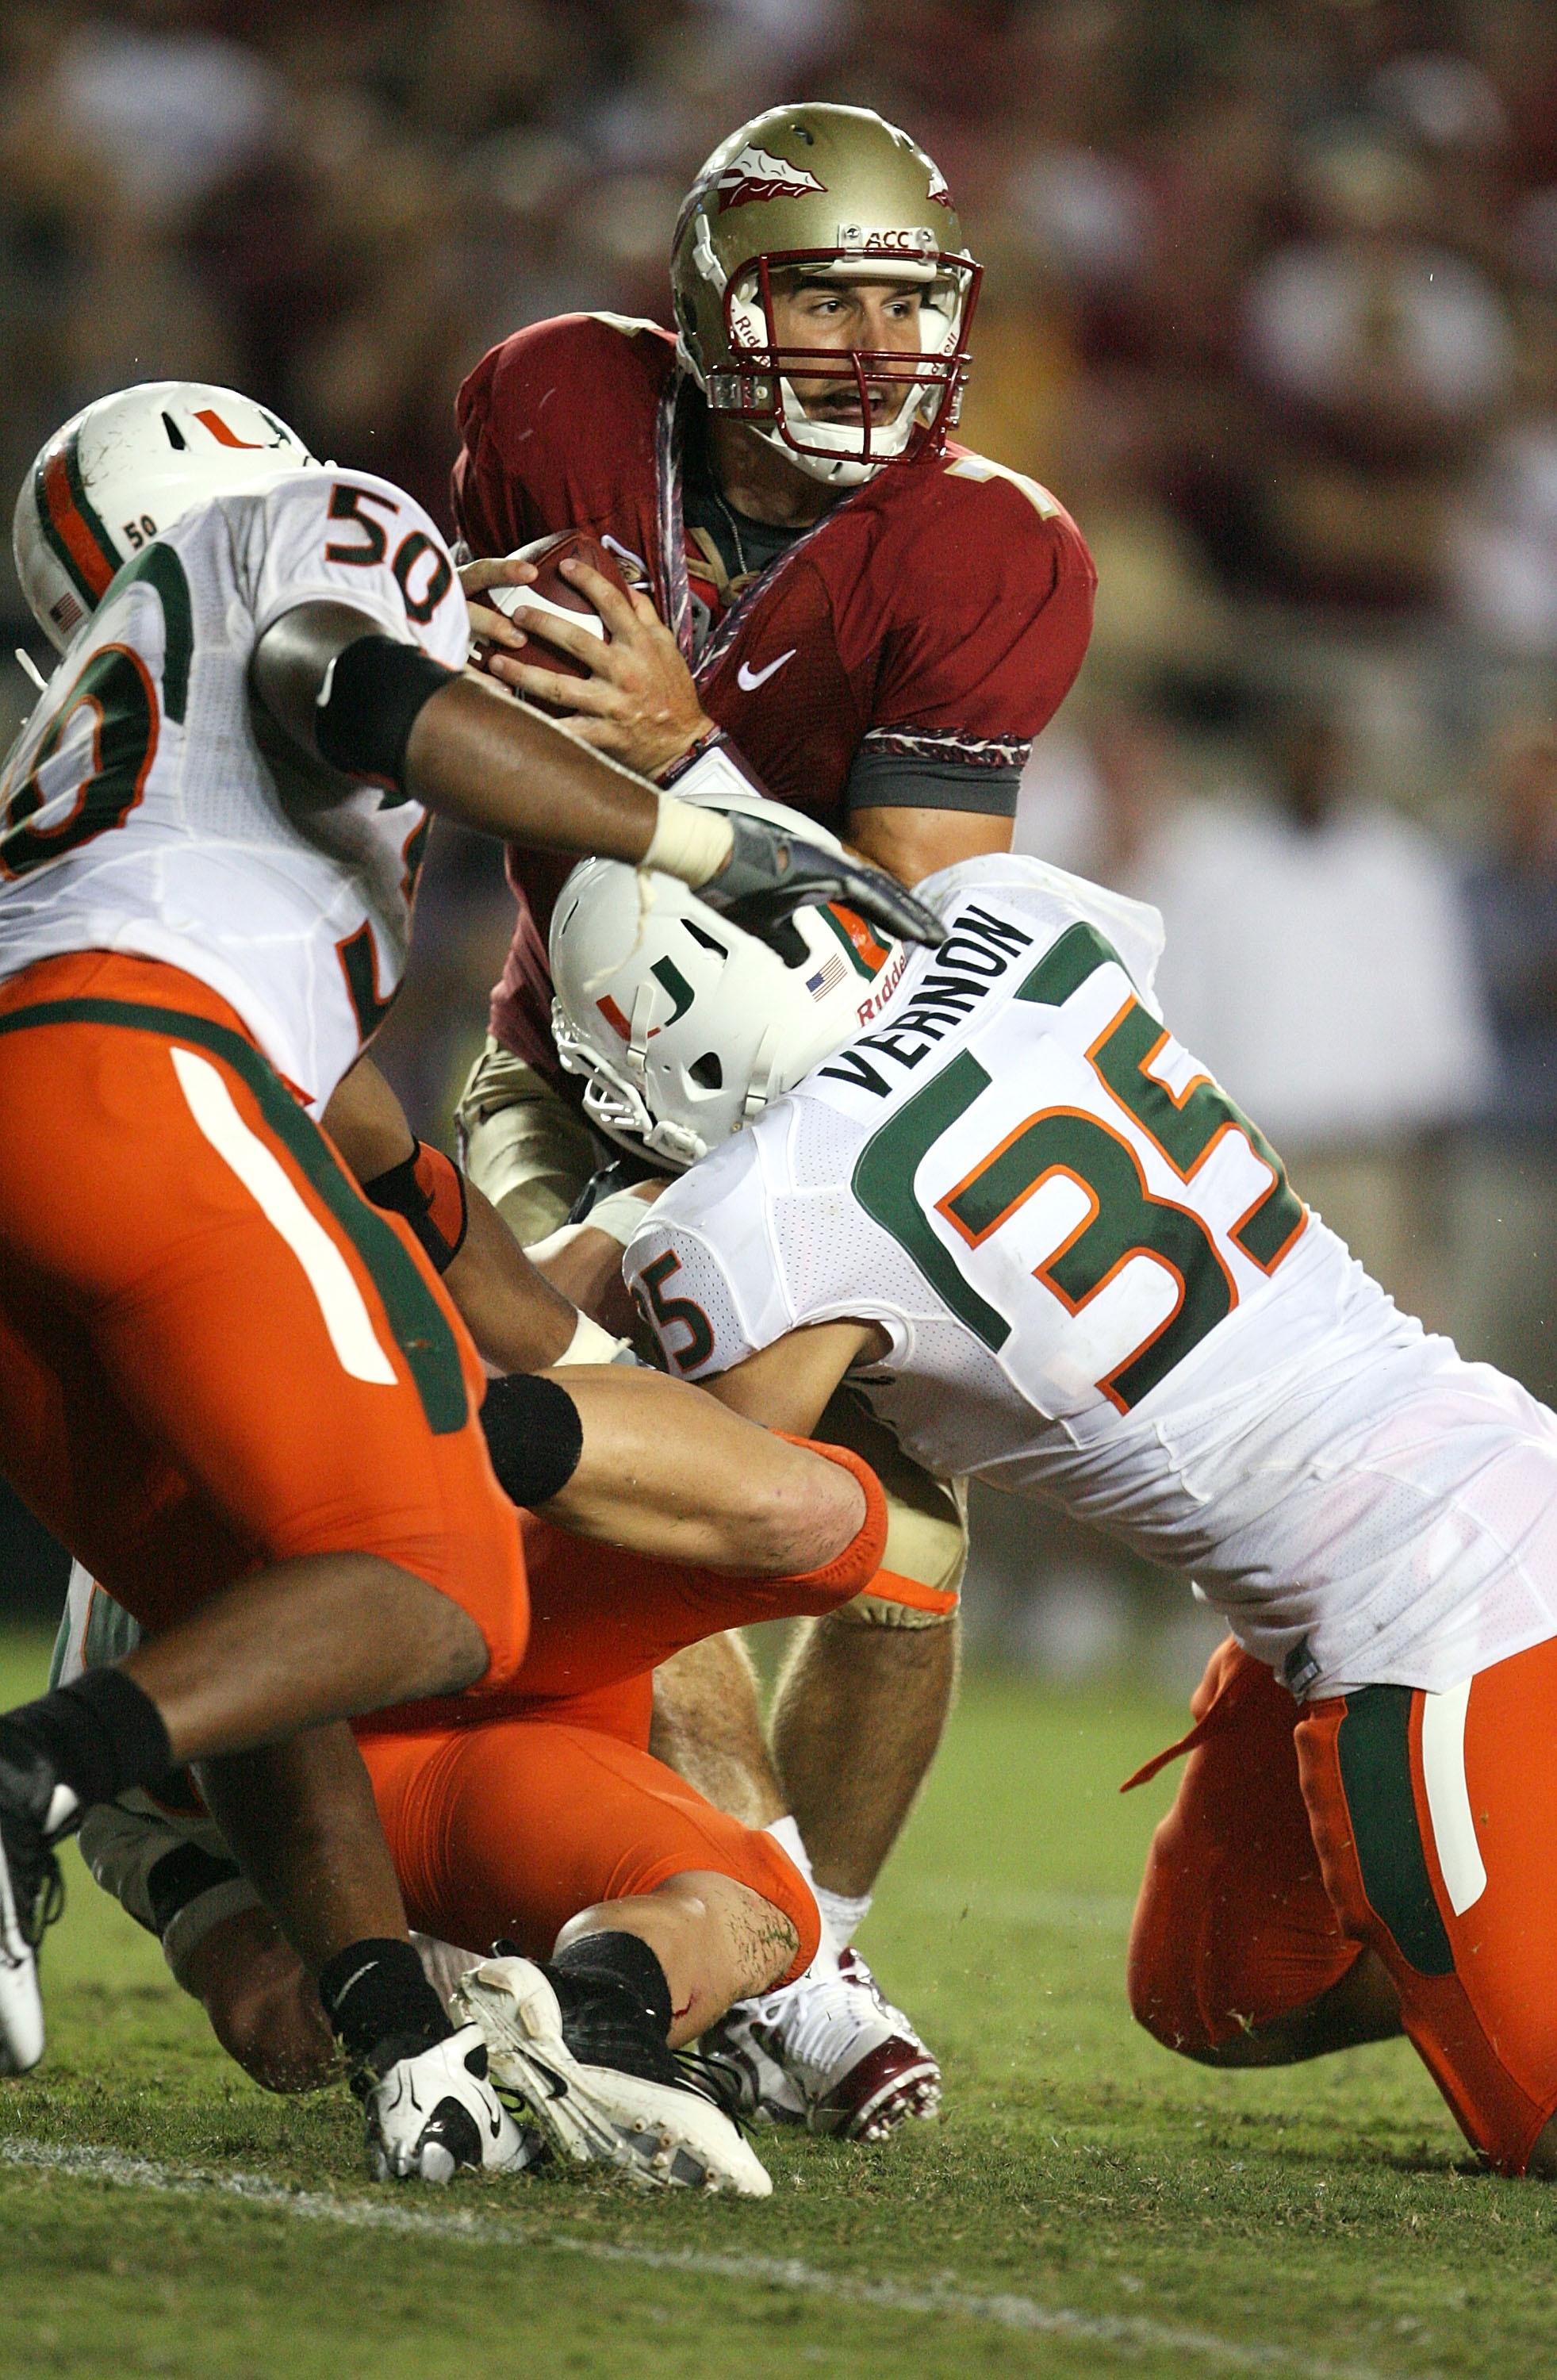 TALLAHASSEE, FL - SEPTEMBER 07:  Defenders Olivier Vernon #35, Colin McCarthy #44 and Darryl Sharpton #50 of the Miami Hurricanes bring down quarterback Christian Ponder #7 of the Florida State Seminoles during a goal line stand in the fourth quarter at D